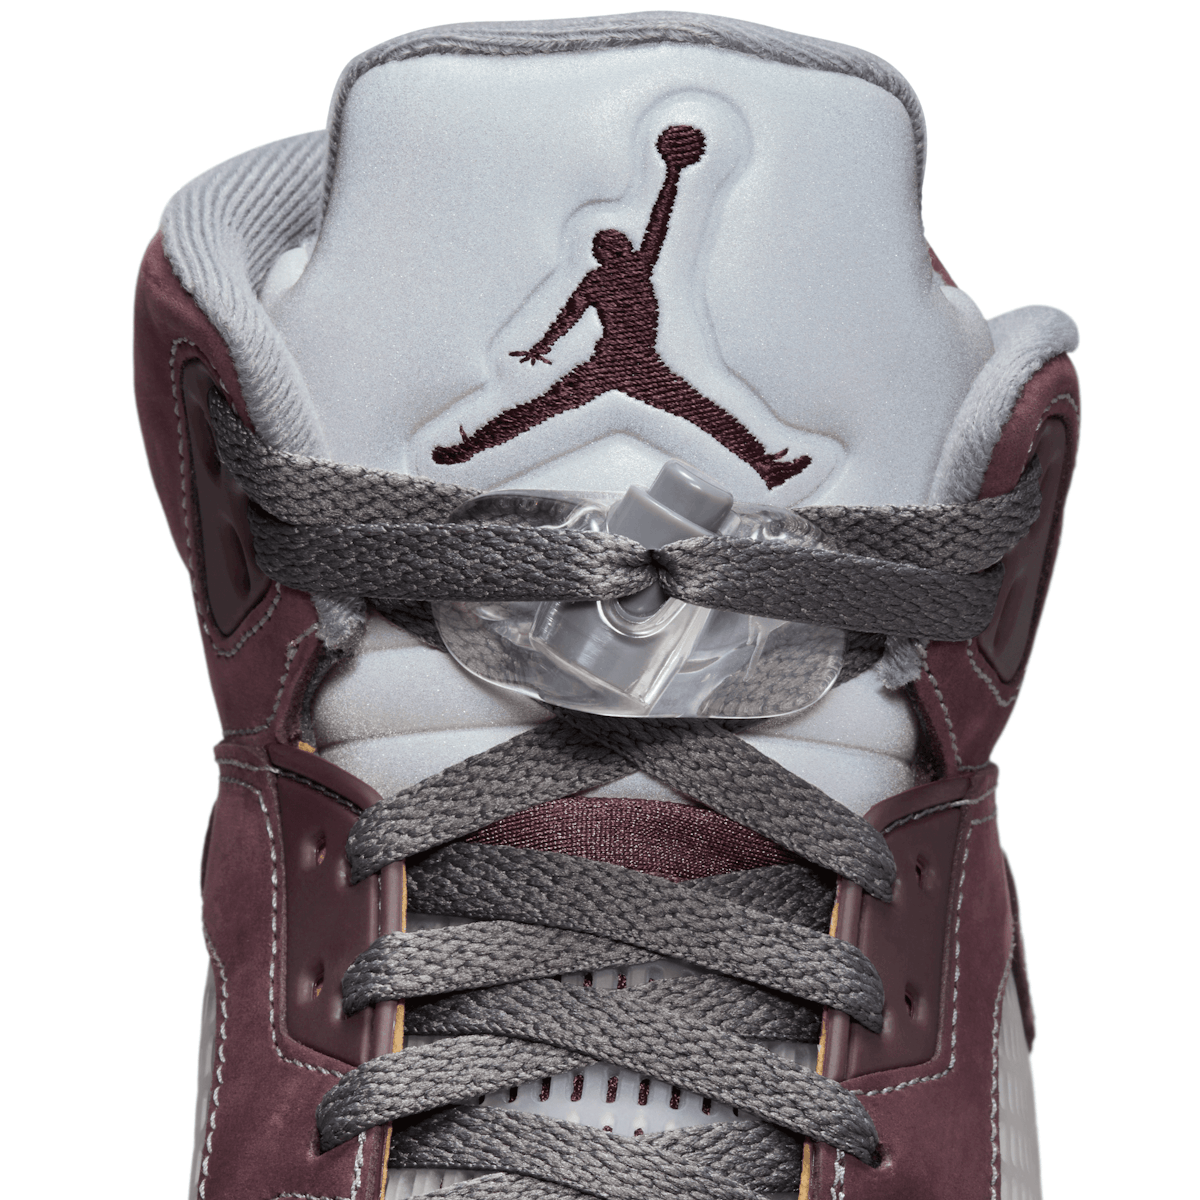 The Air Jordan 5 Burgundy is Officially Returning in 2023 - The Edit LDN